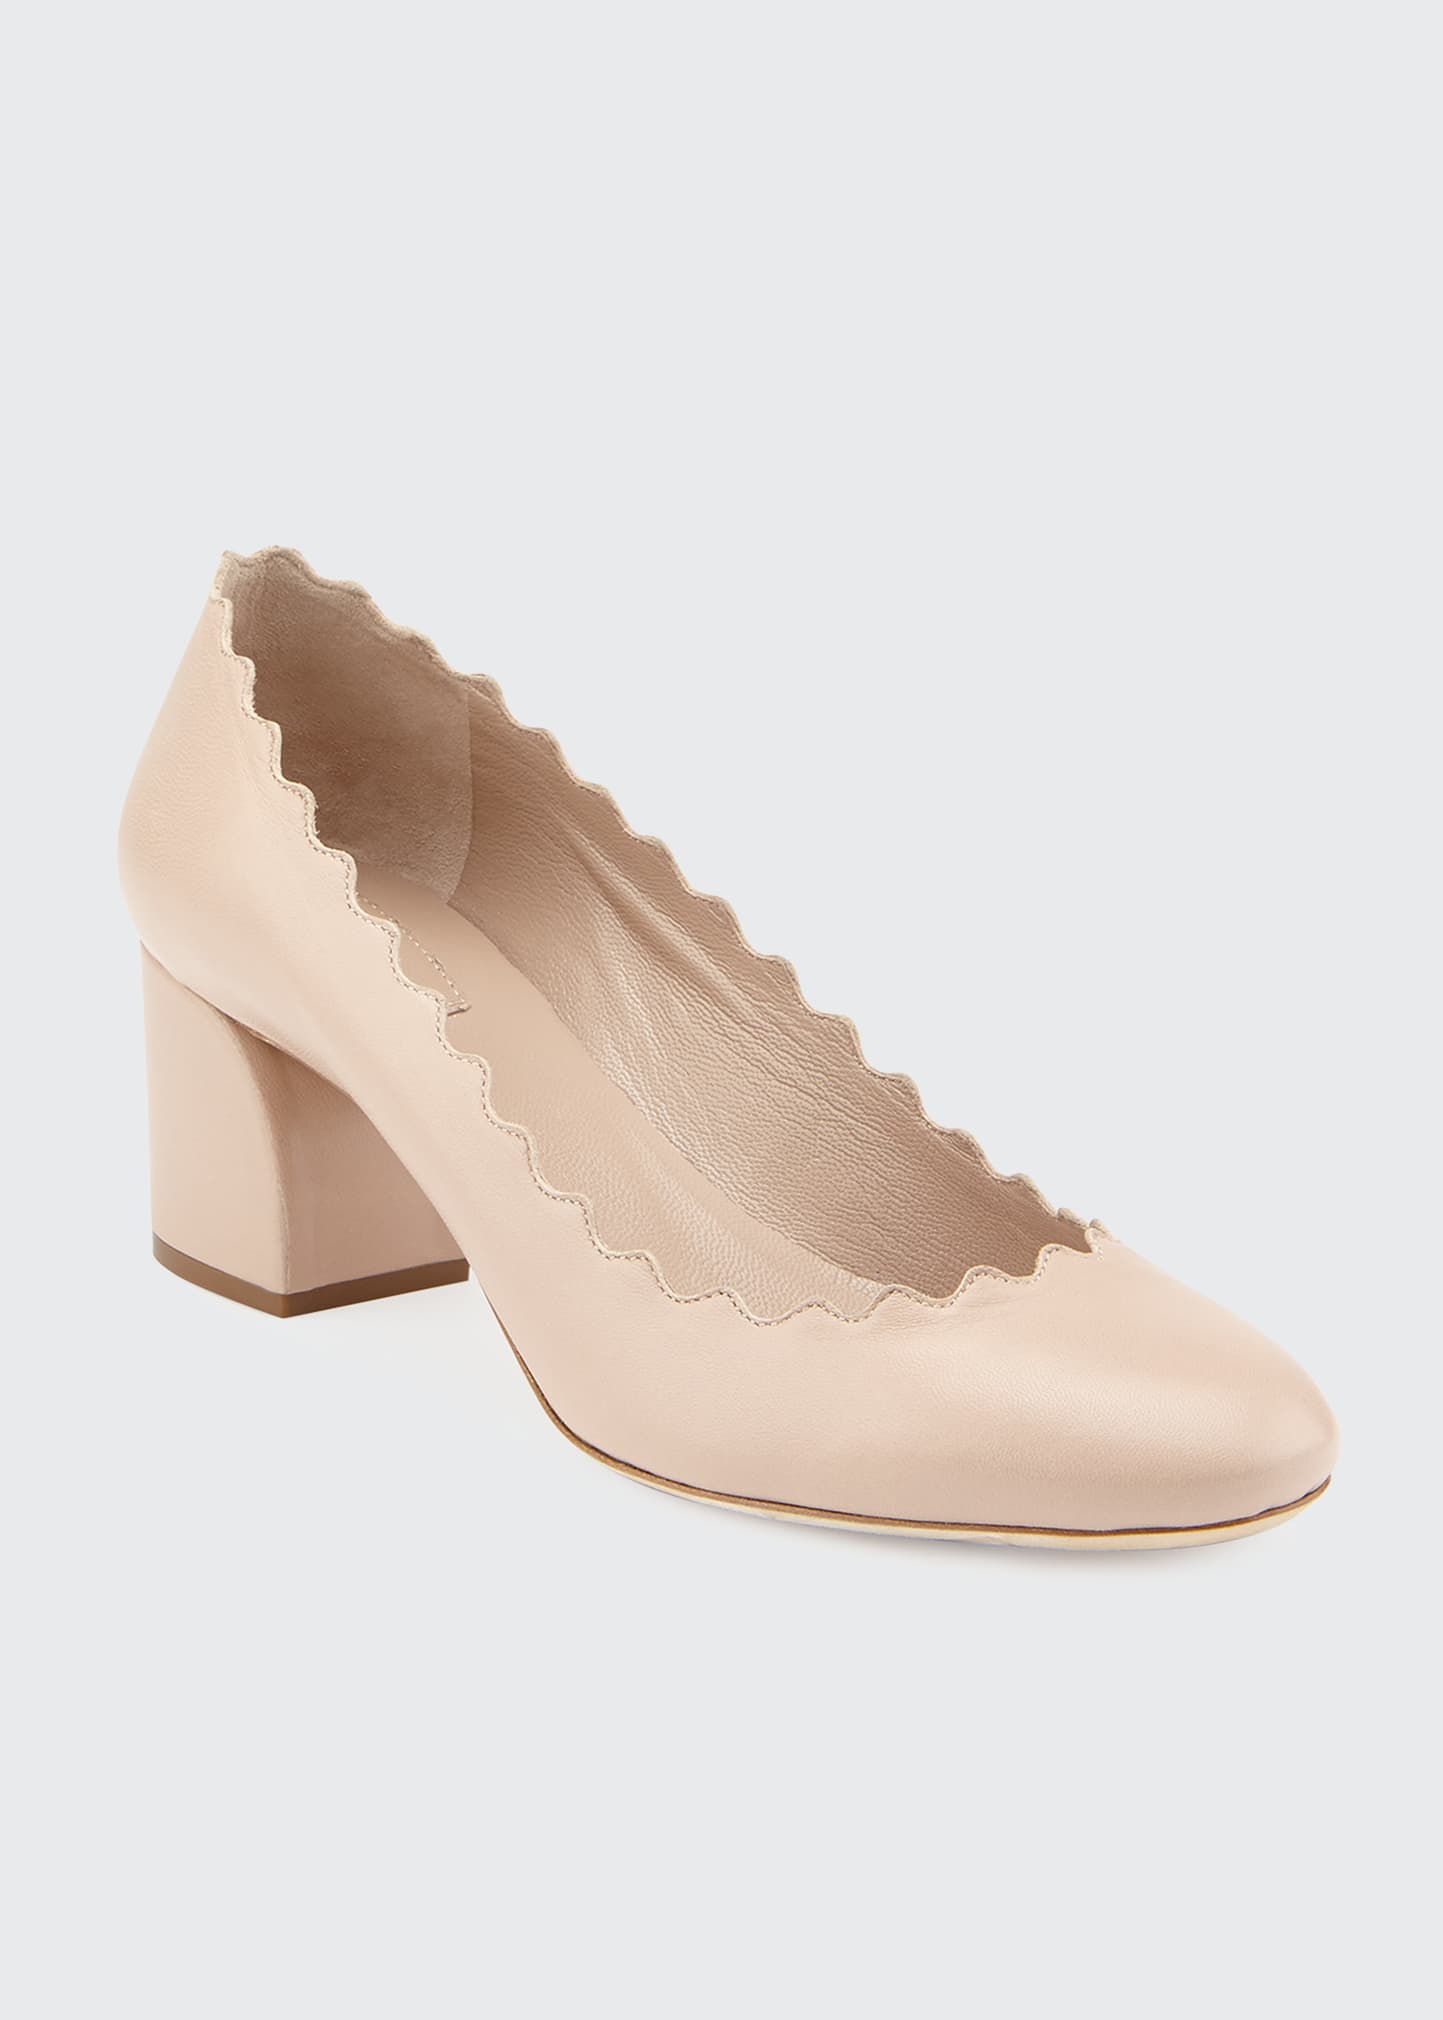 Chloe Scalloped Leather Pumps